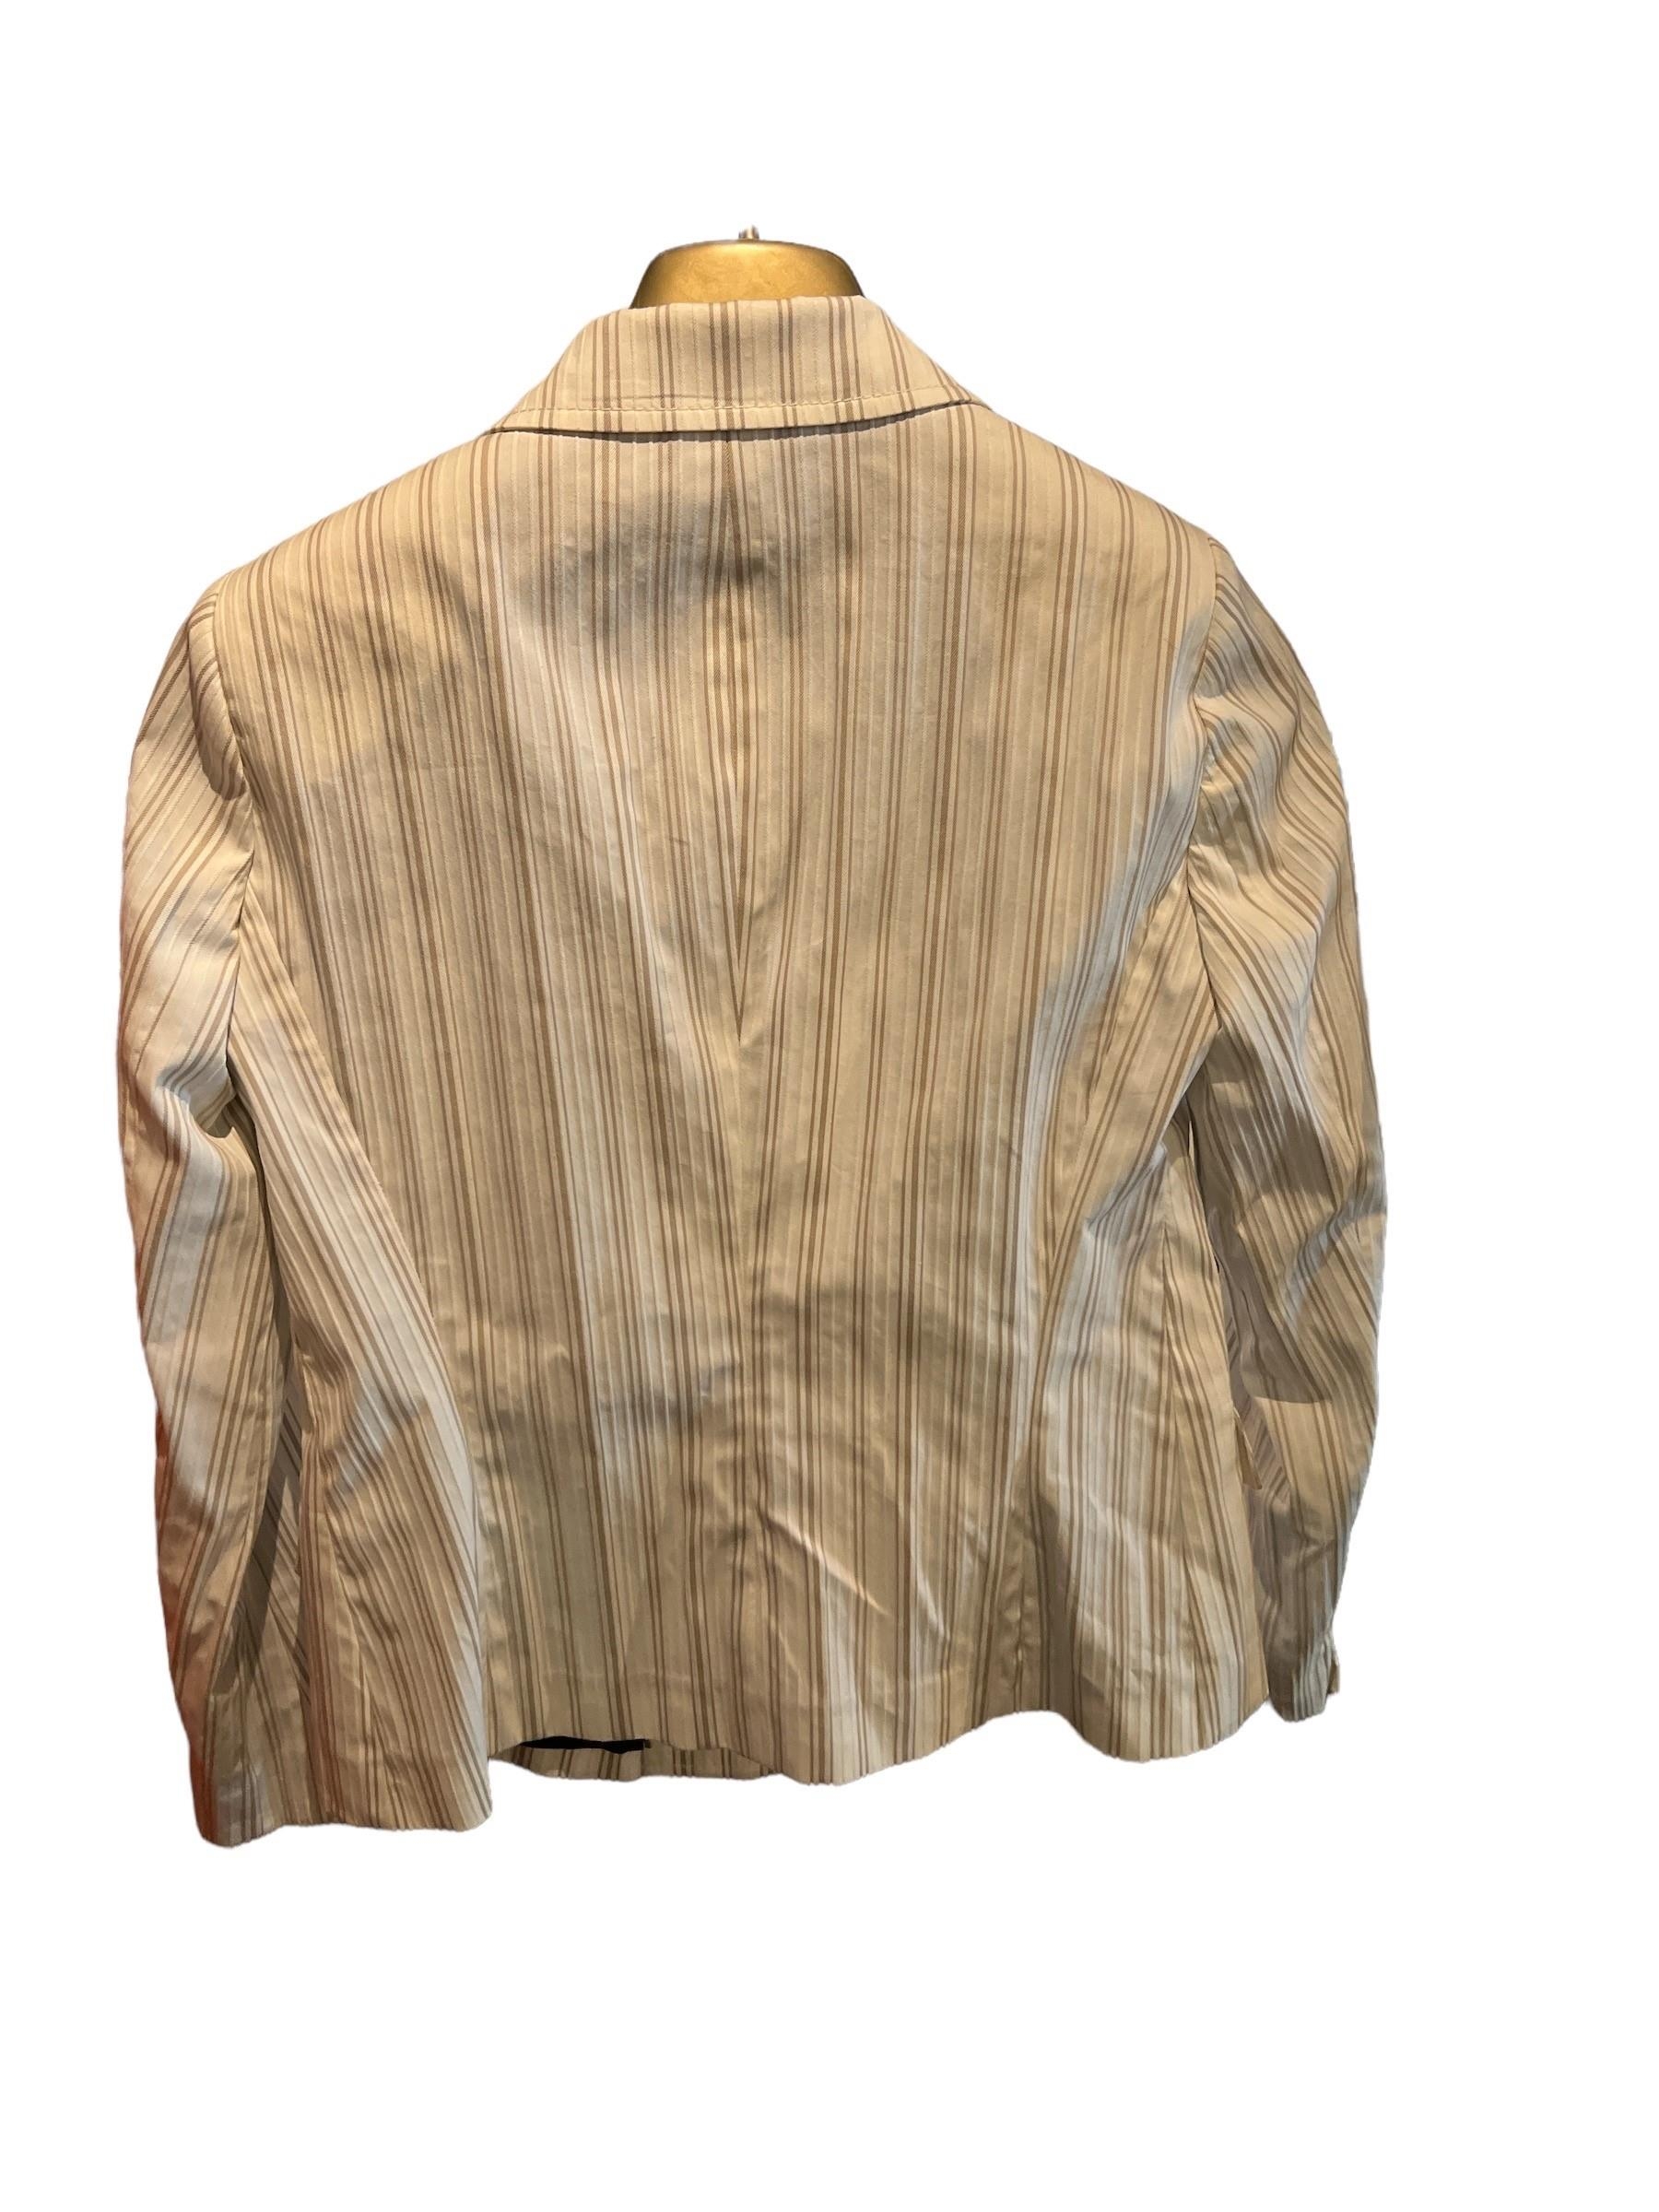 DAKS, A CREAM AND BEIGE PINSTRIPE SUIT JACKET. (size 14) - Image 3 of 5